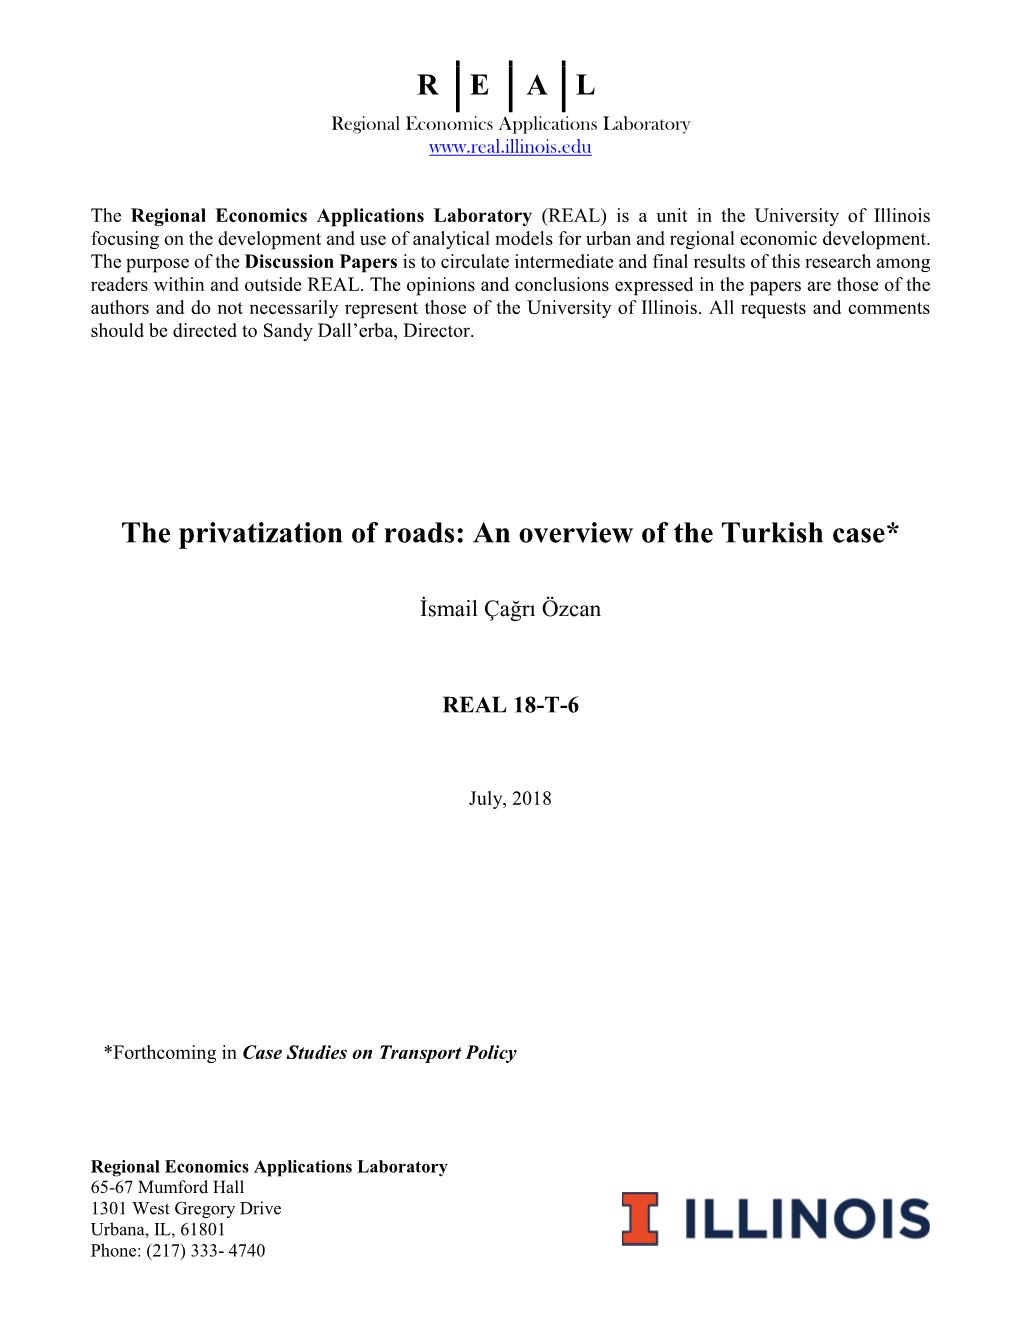 R E a L the Privatization of Roads: an Overview of the Turkish Case*